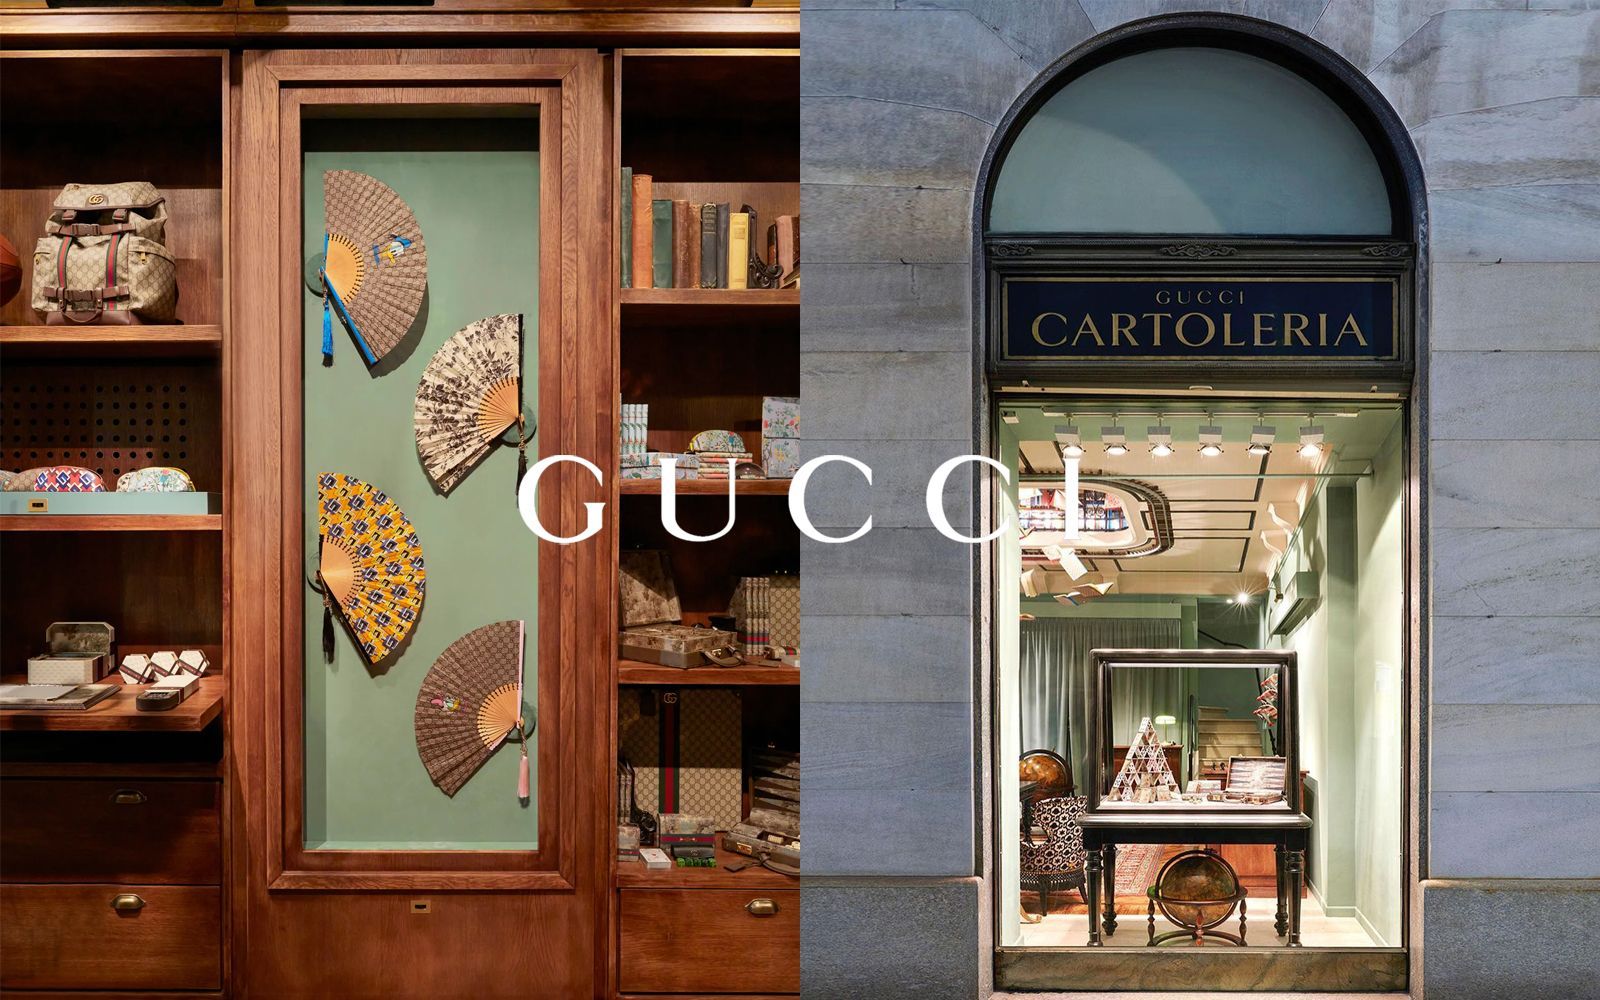 Gucci has opened a stationery shop for Milan Design Week Until September 17th